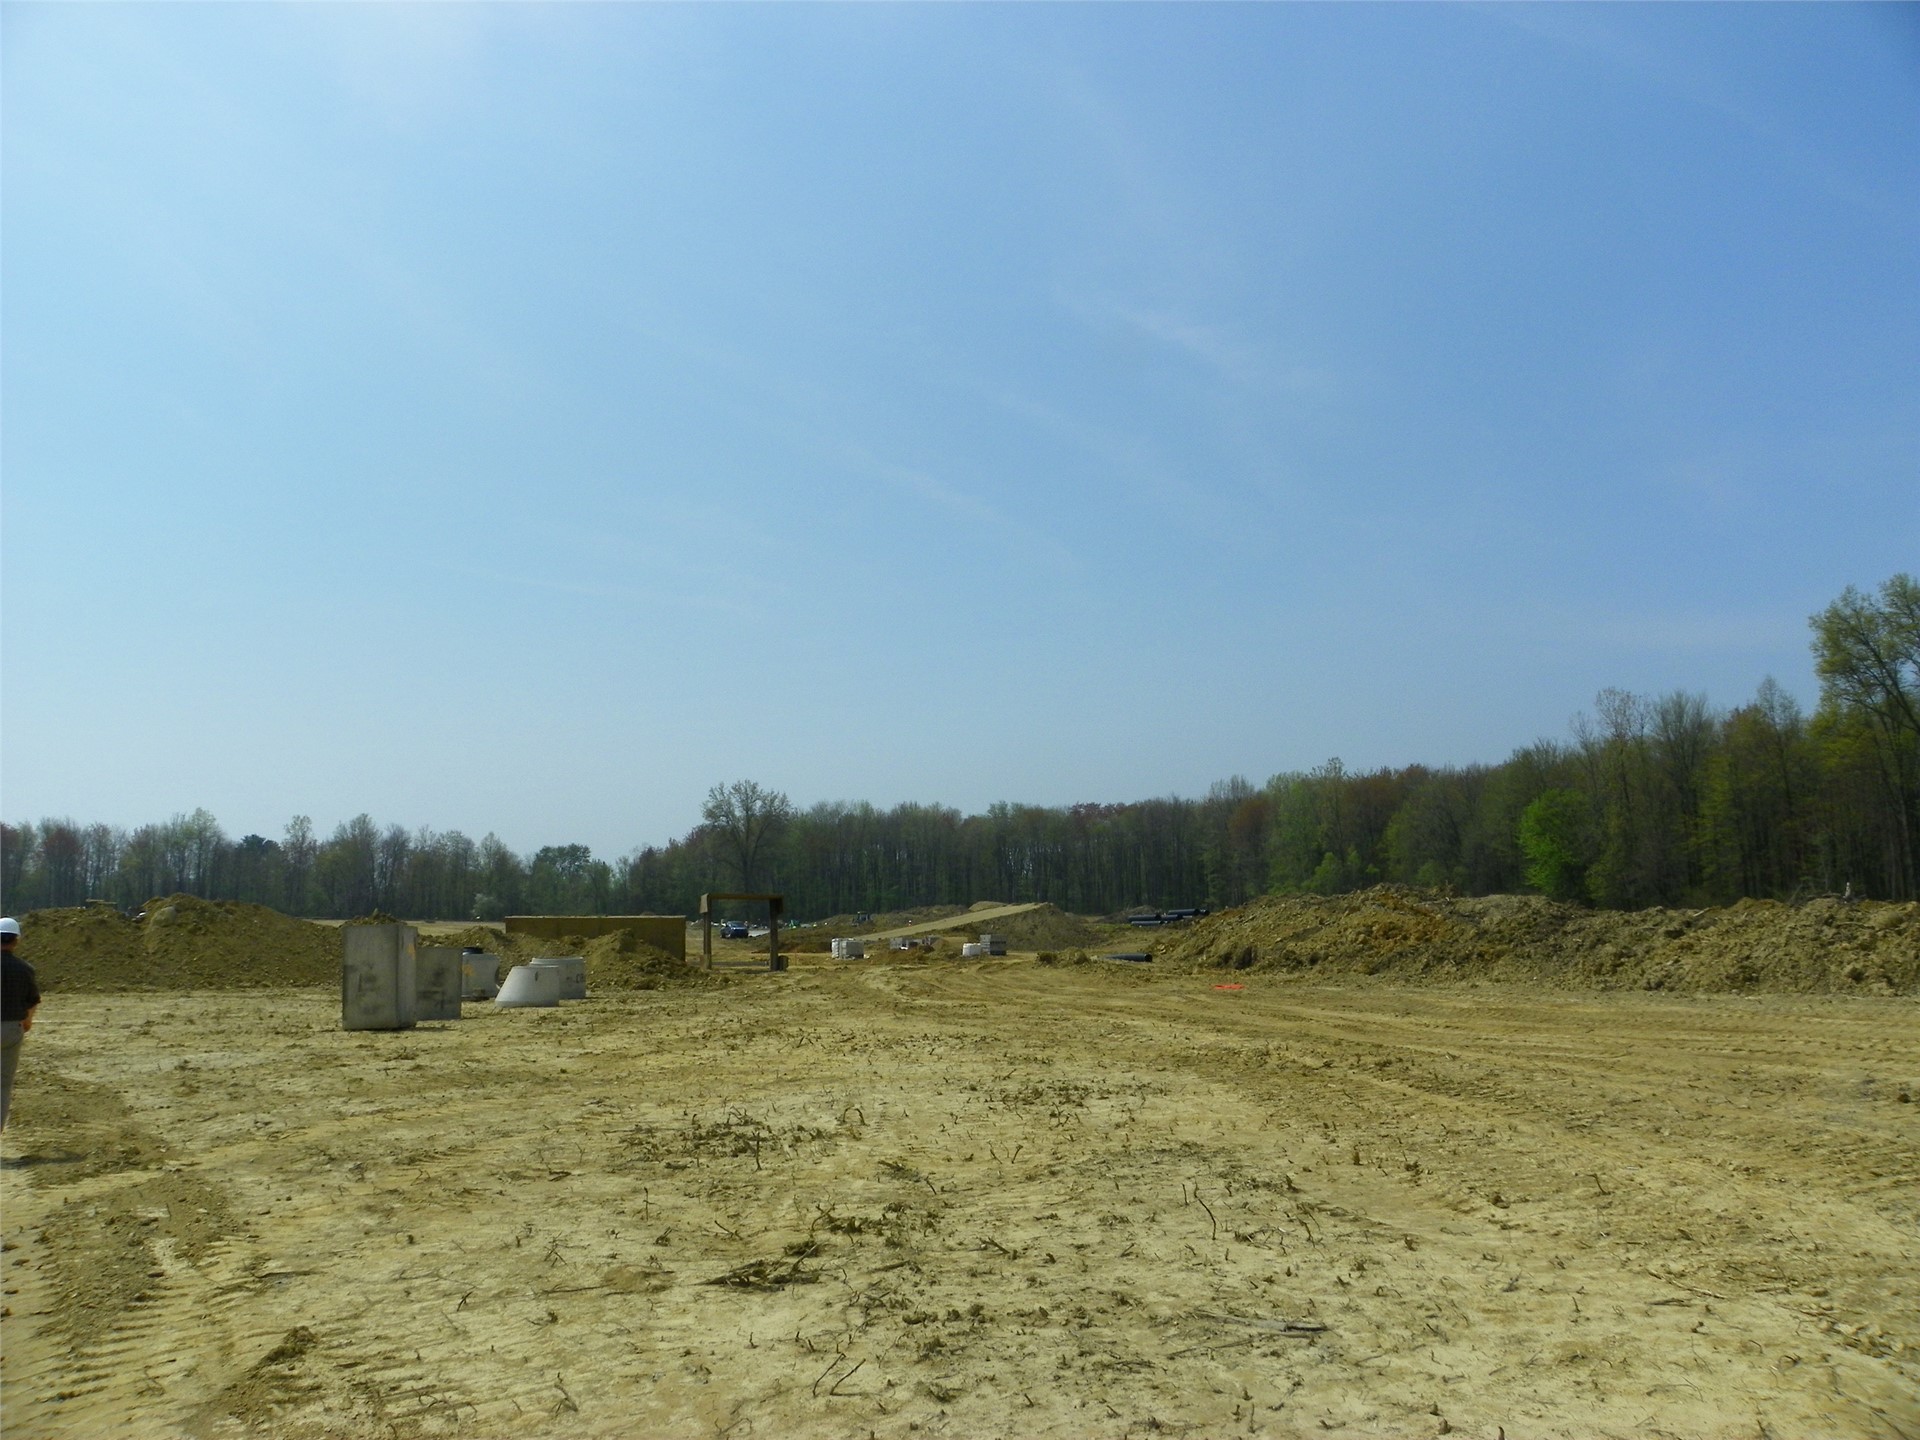 Photo of stadium site (dirt ramp is fill topsoil)—picture taken from parking lot